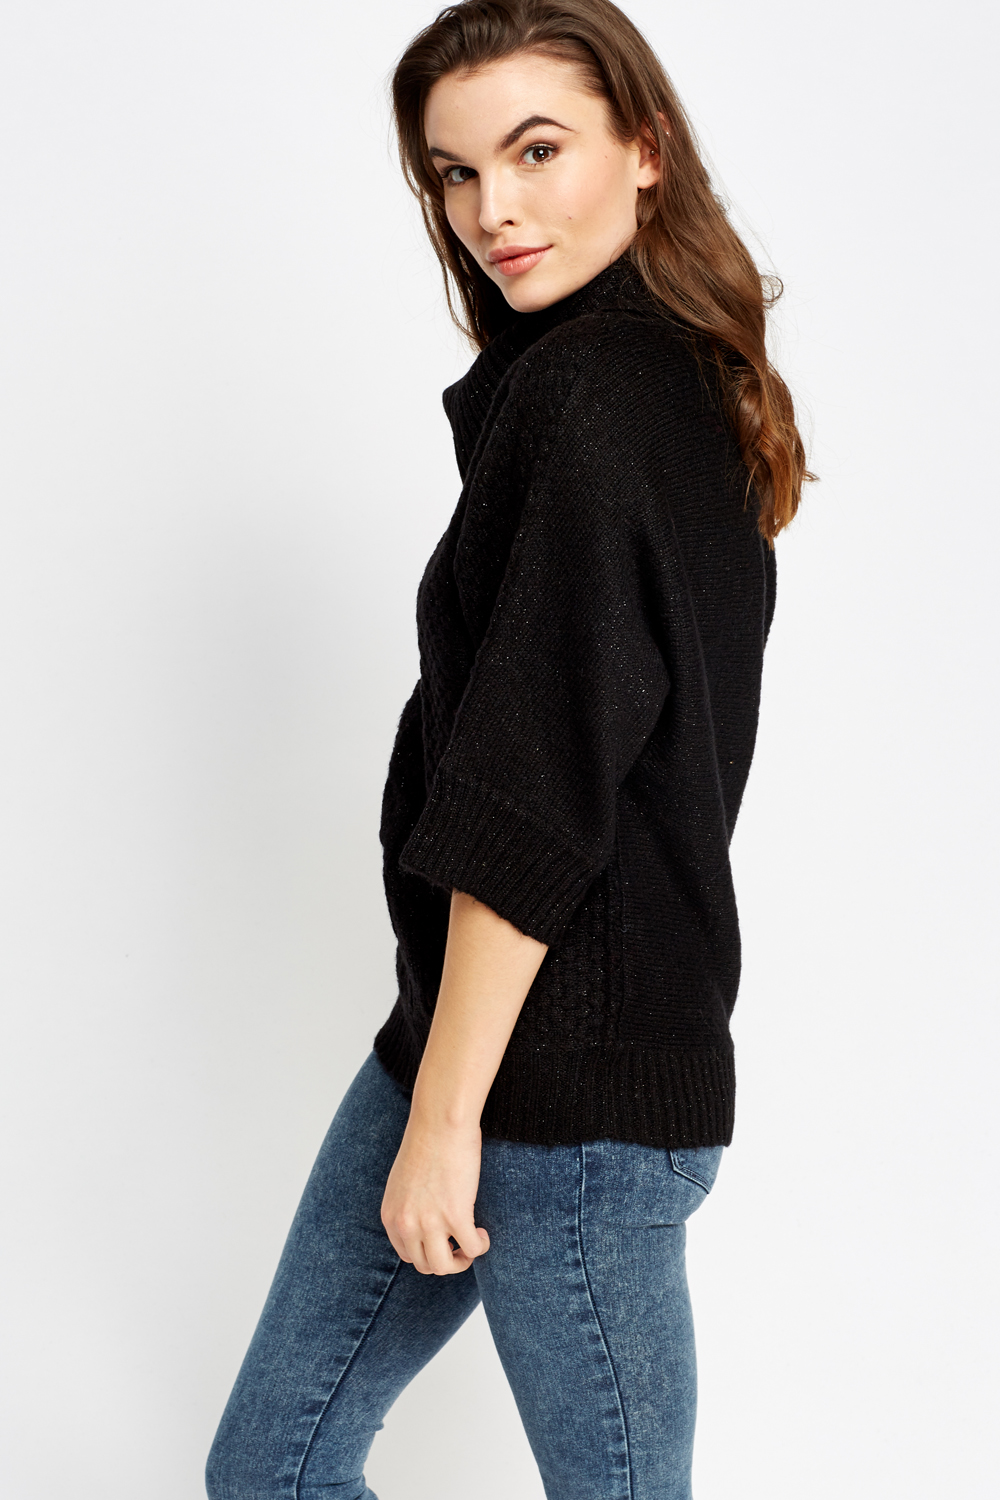 Metallic Cable knit Cowl Neck Jumper - Just $7